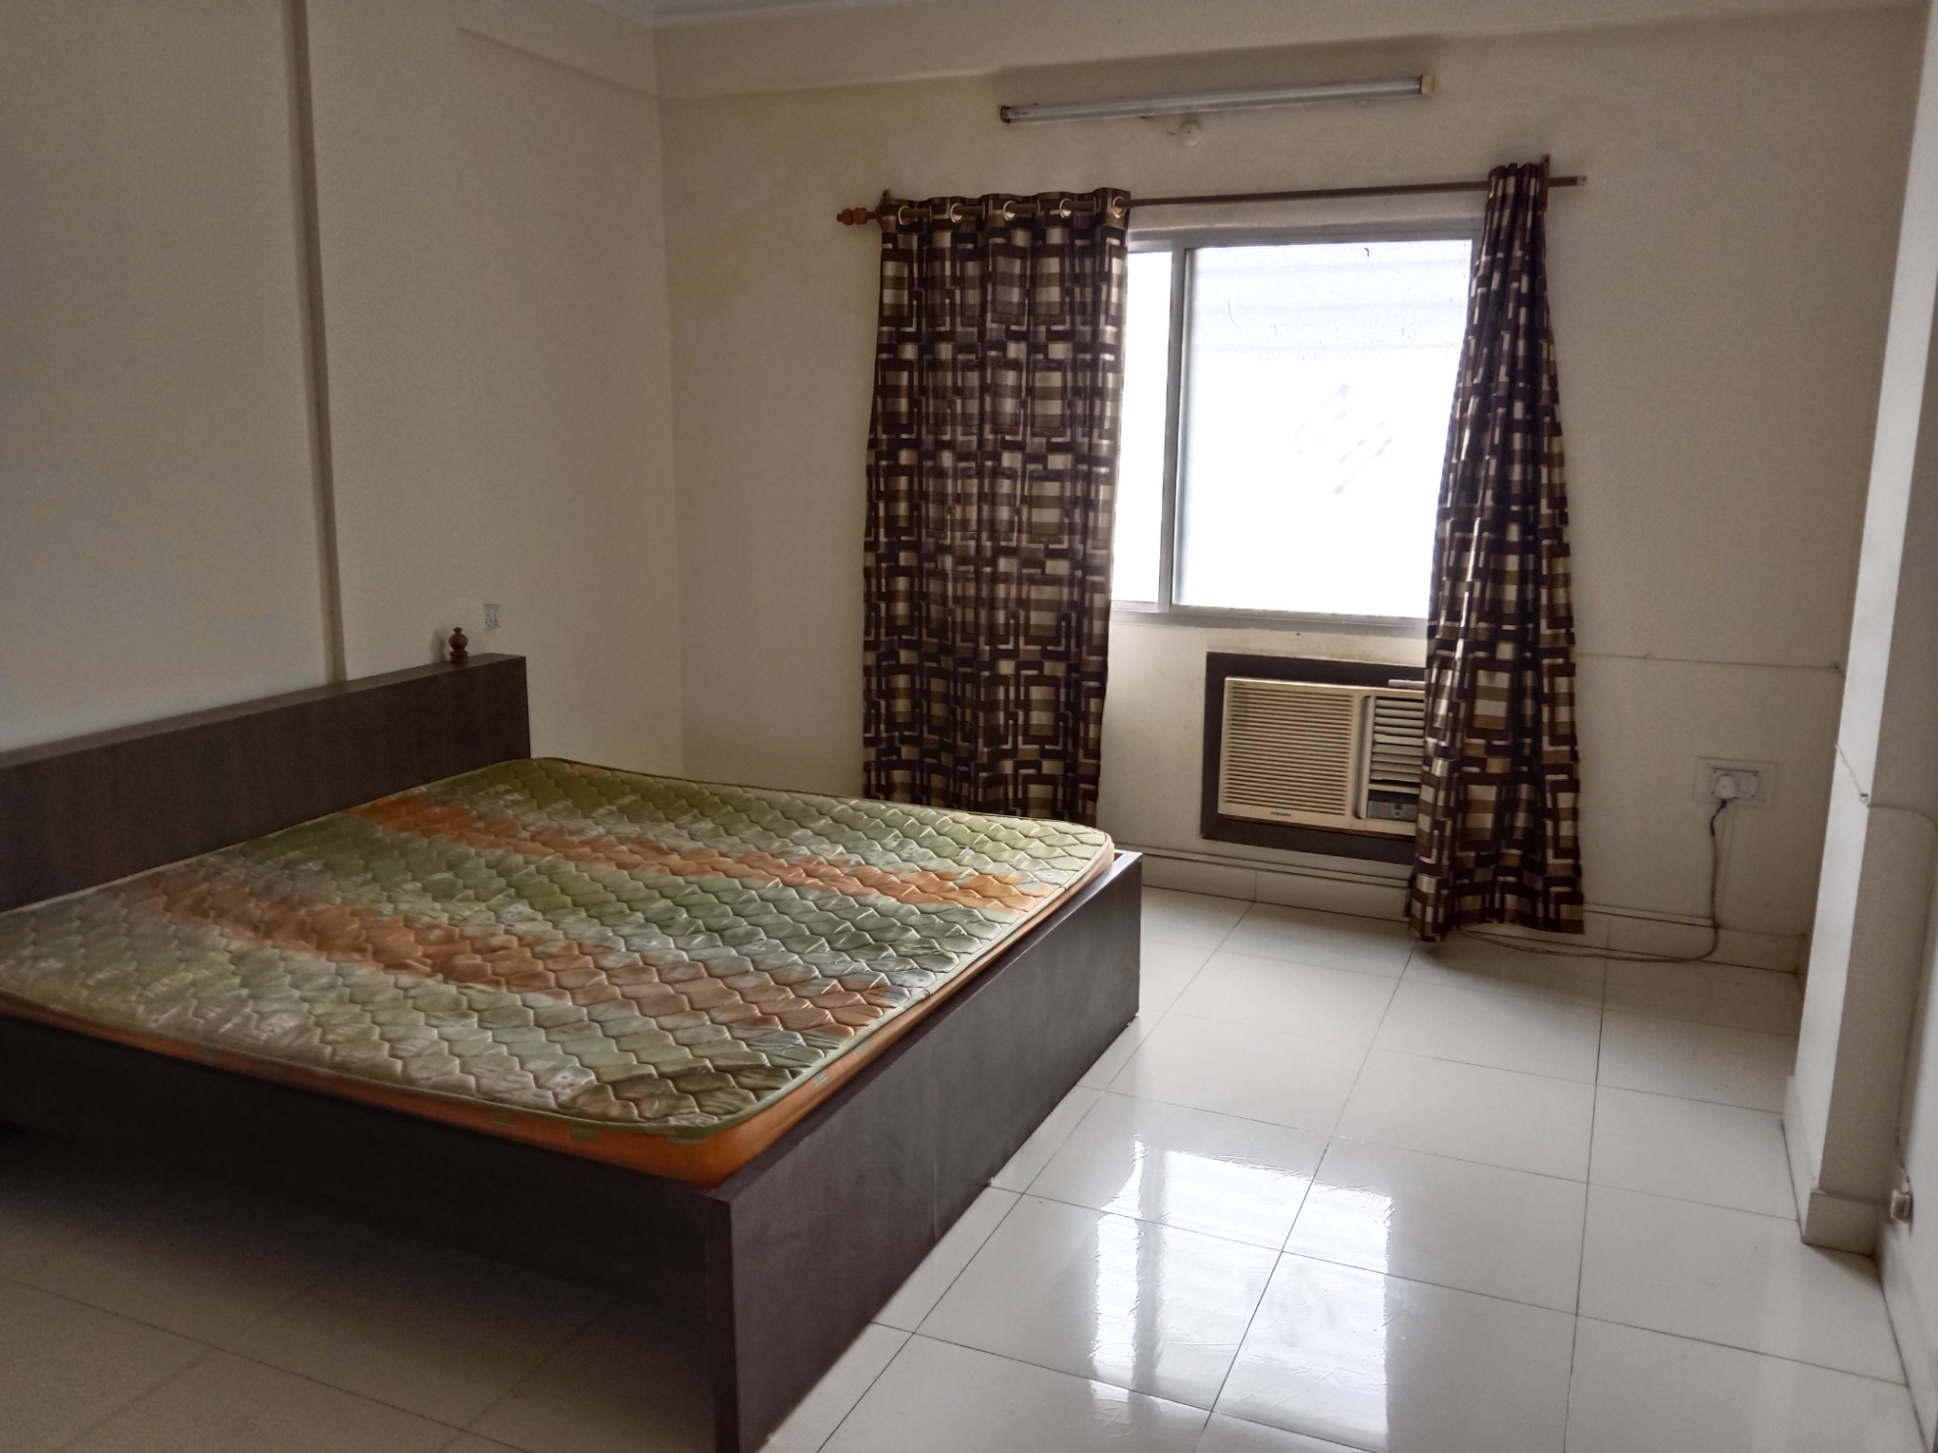 3 Bed/ 3 Bath Apartment/ Flat; 1,200 sq. ft. carpet area, Furnished for rent @Gulmohar Bhopal 